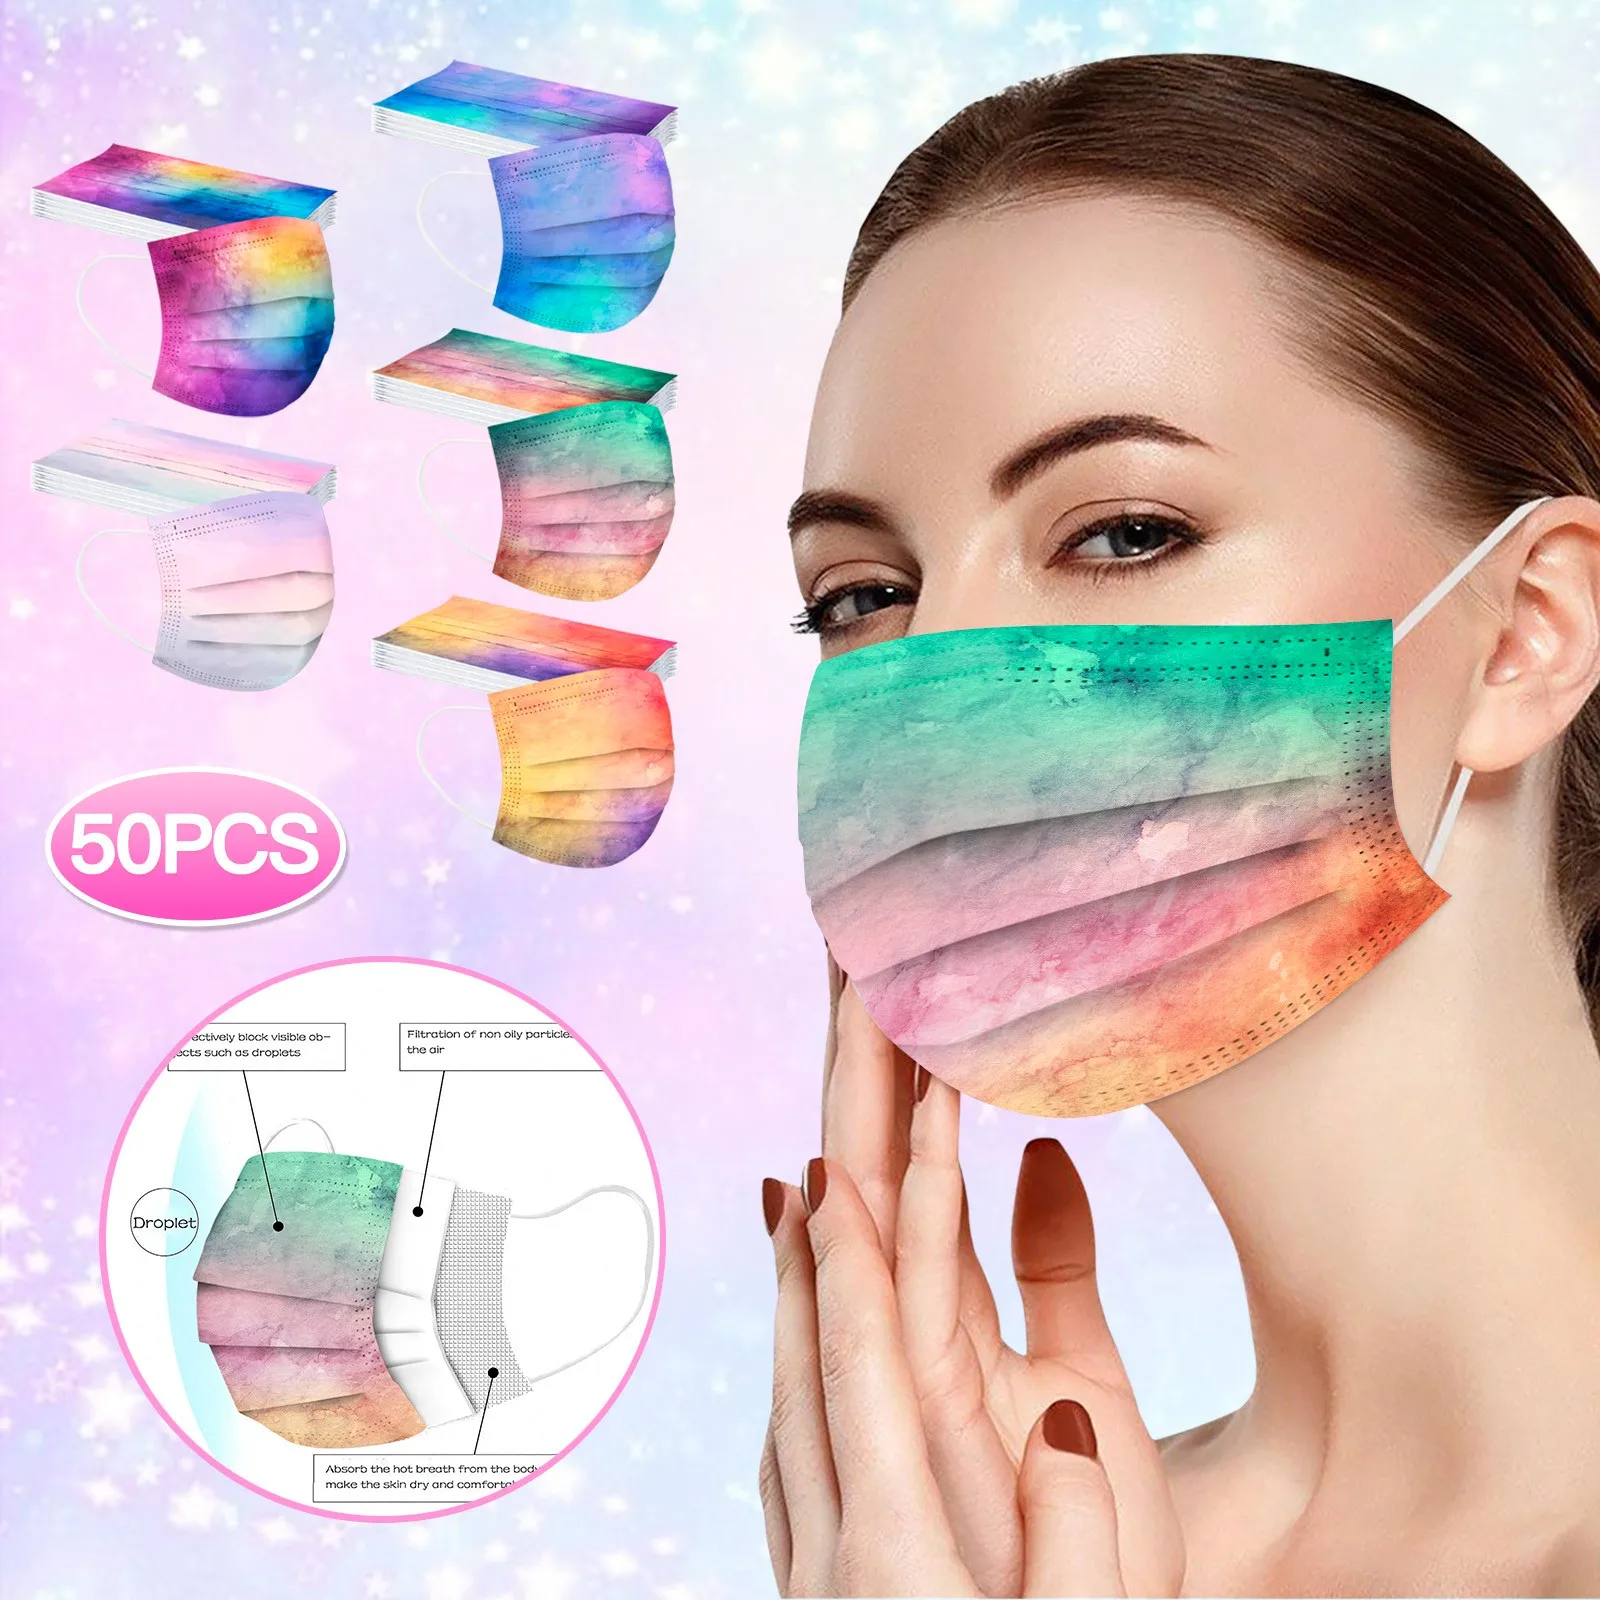 

50pc Disposable Adults Tie Dye Print Mask 3ply Ear Loop Face Mask Mondmasker Mascarillas Desechables Halloween Cosplay Masque